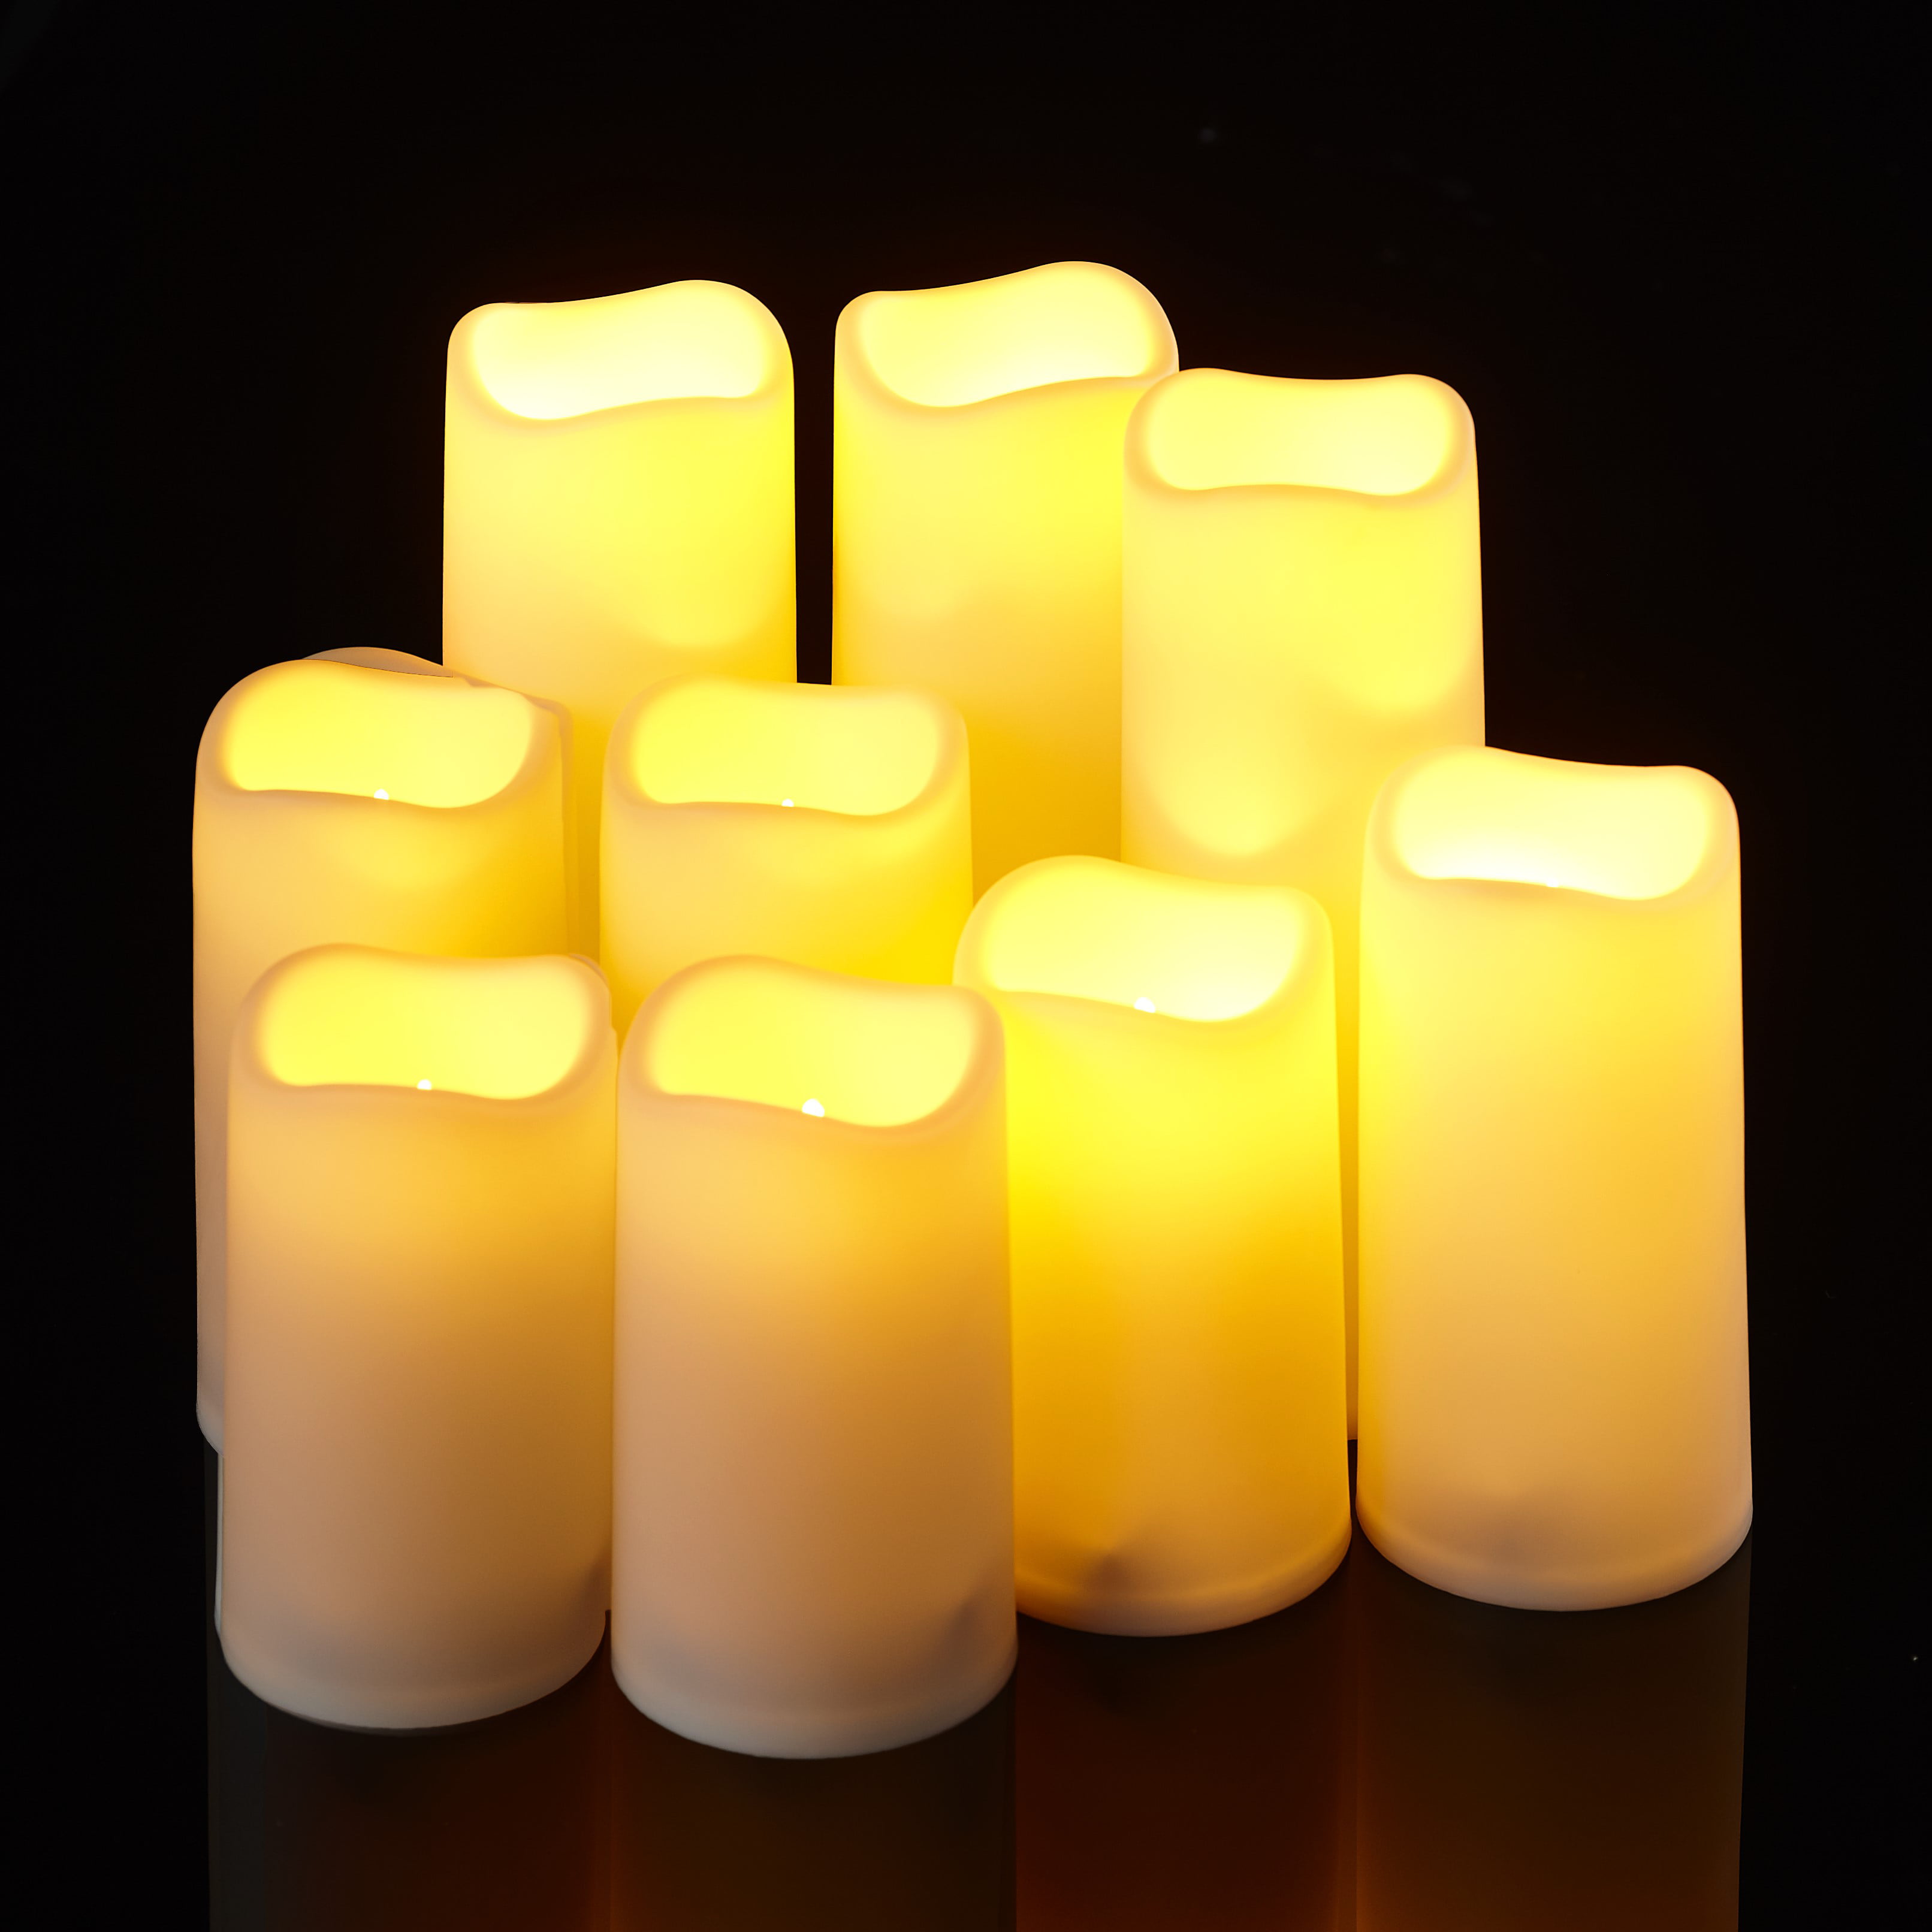 Eloer Flickering Moving Wick Flameless Pillar Candle Led Candles Remote Set 9 